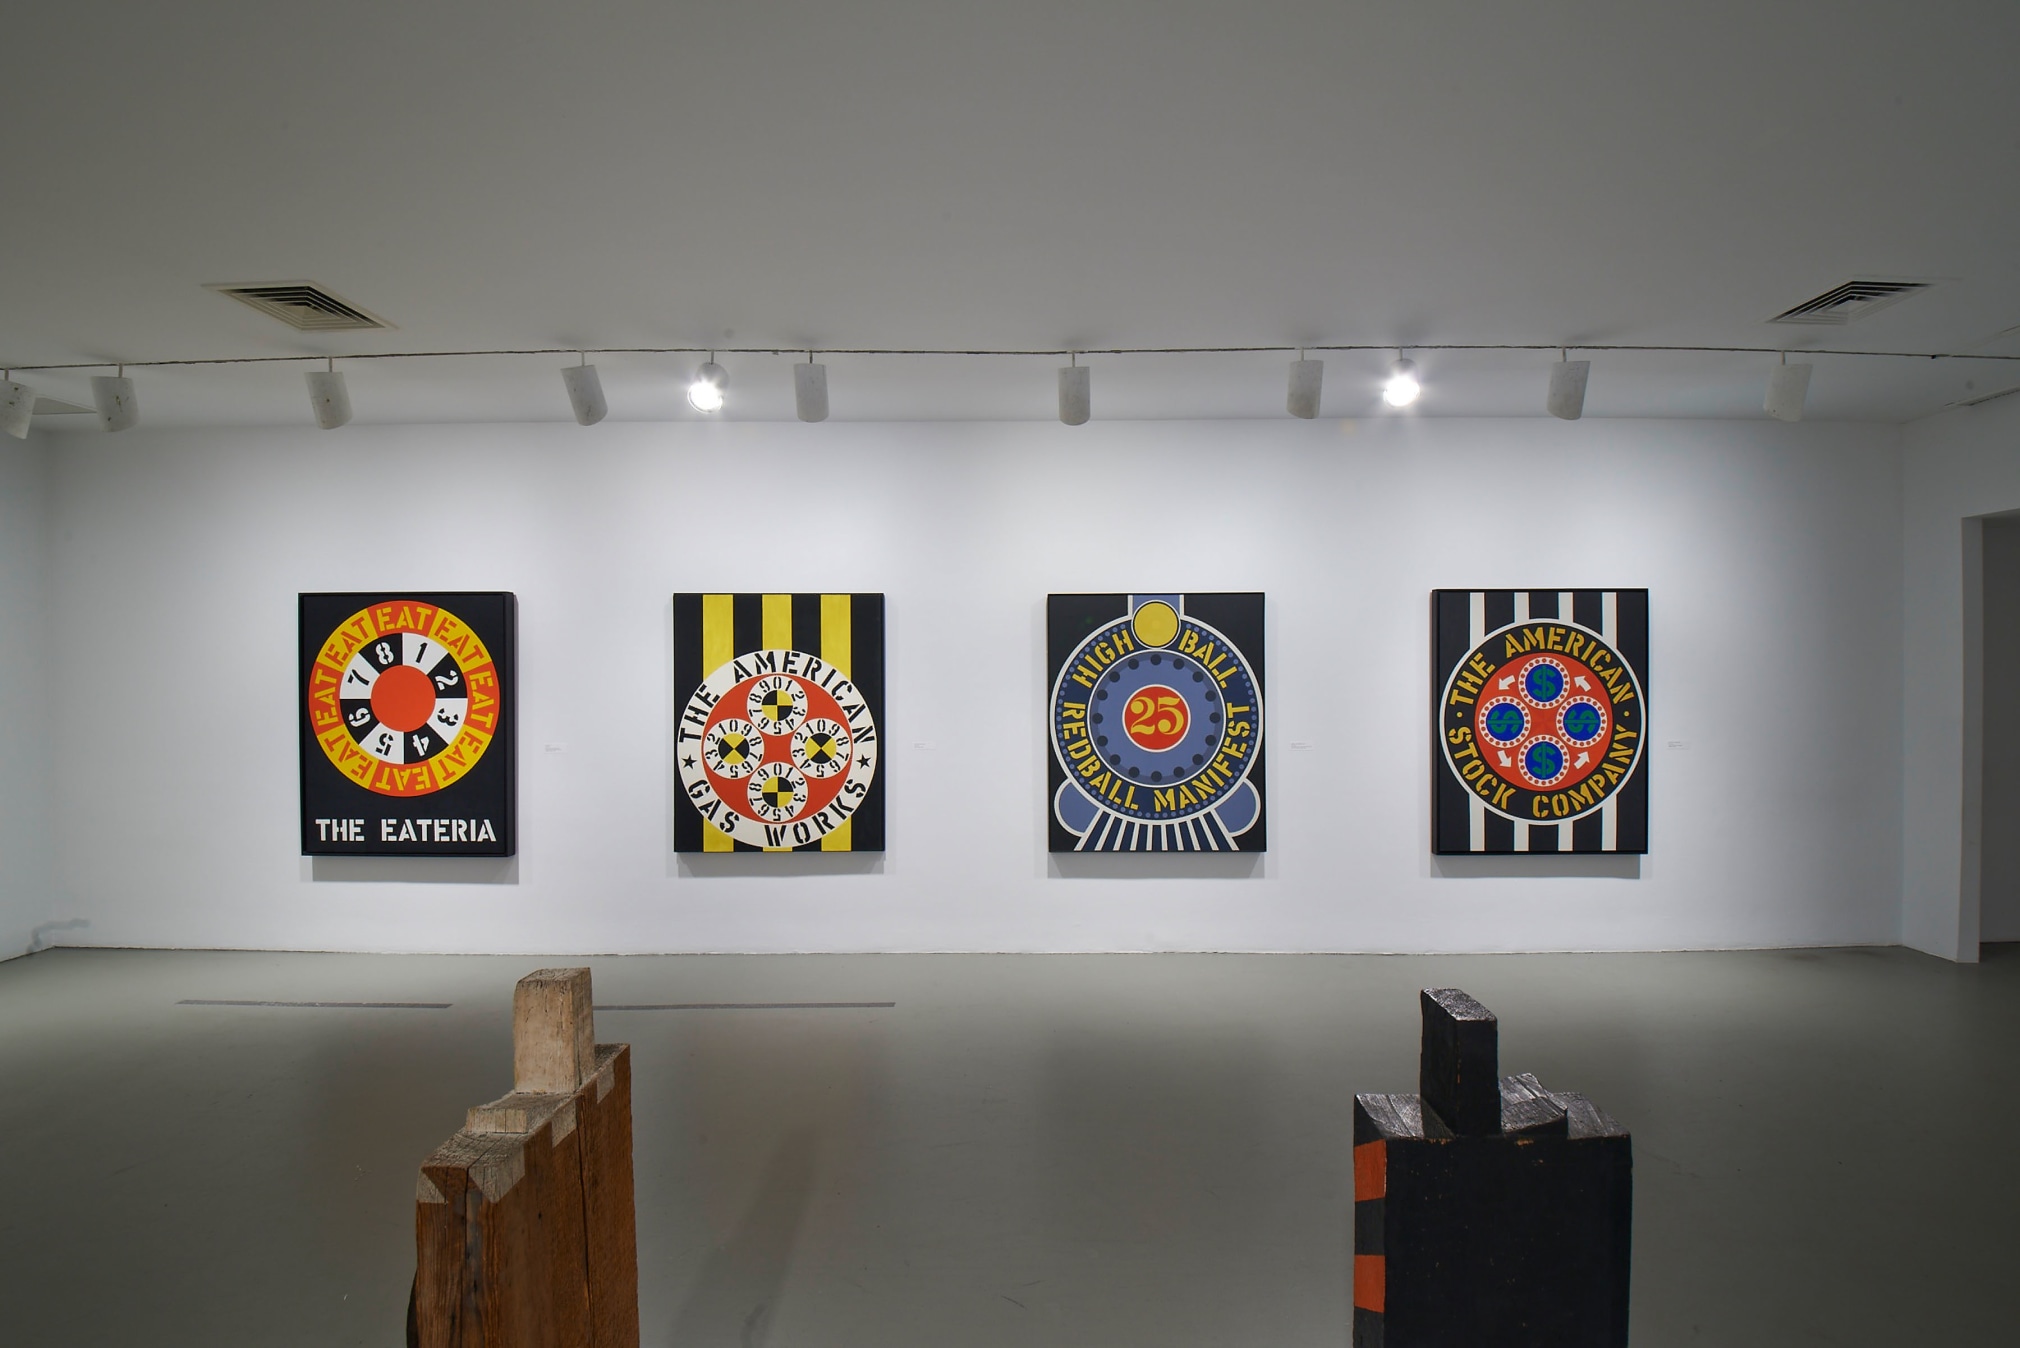 Installation view of Robert Indiana: Beyond LOVE, Whitney Museum of American Art, New York, September 26, 2013&ndash;January 5, 2014. Left to right, The Eateria (1962), The American Gas Works (1961&ndash;62), Highball on the Redball Manifest (1963), and The American Stock Company (1963). Photo: Tom Powel Imaging; Artwork: &copy; Morgan Art Foundation Ltd./Artists Rights Society (ARS), NY